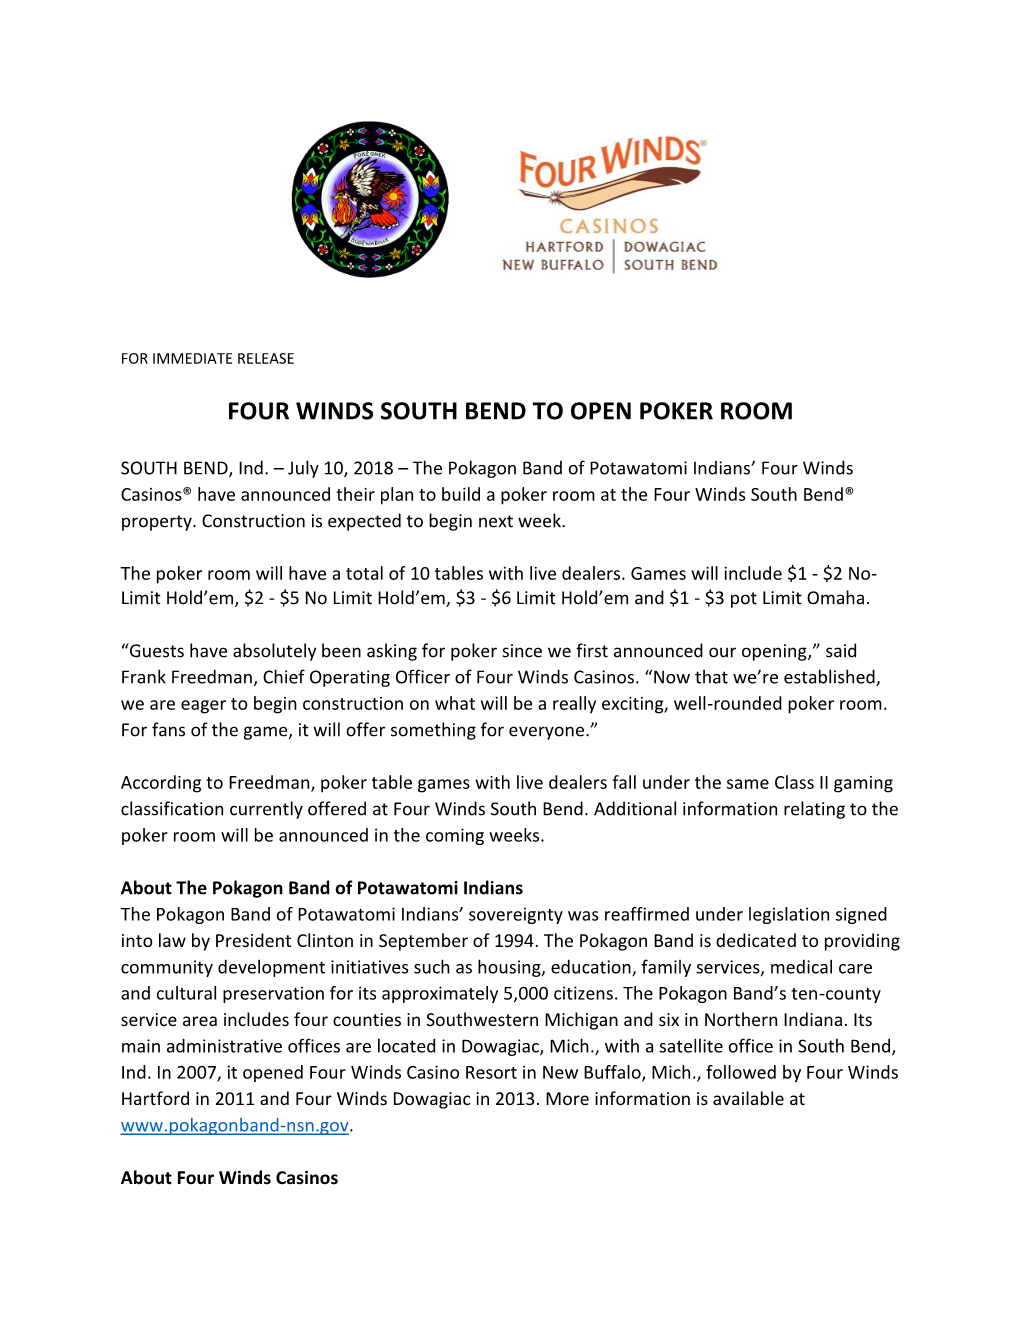 Four Winds South Bend to Open Poker Room